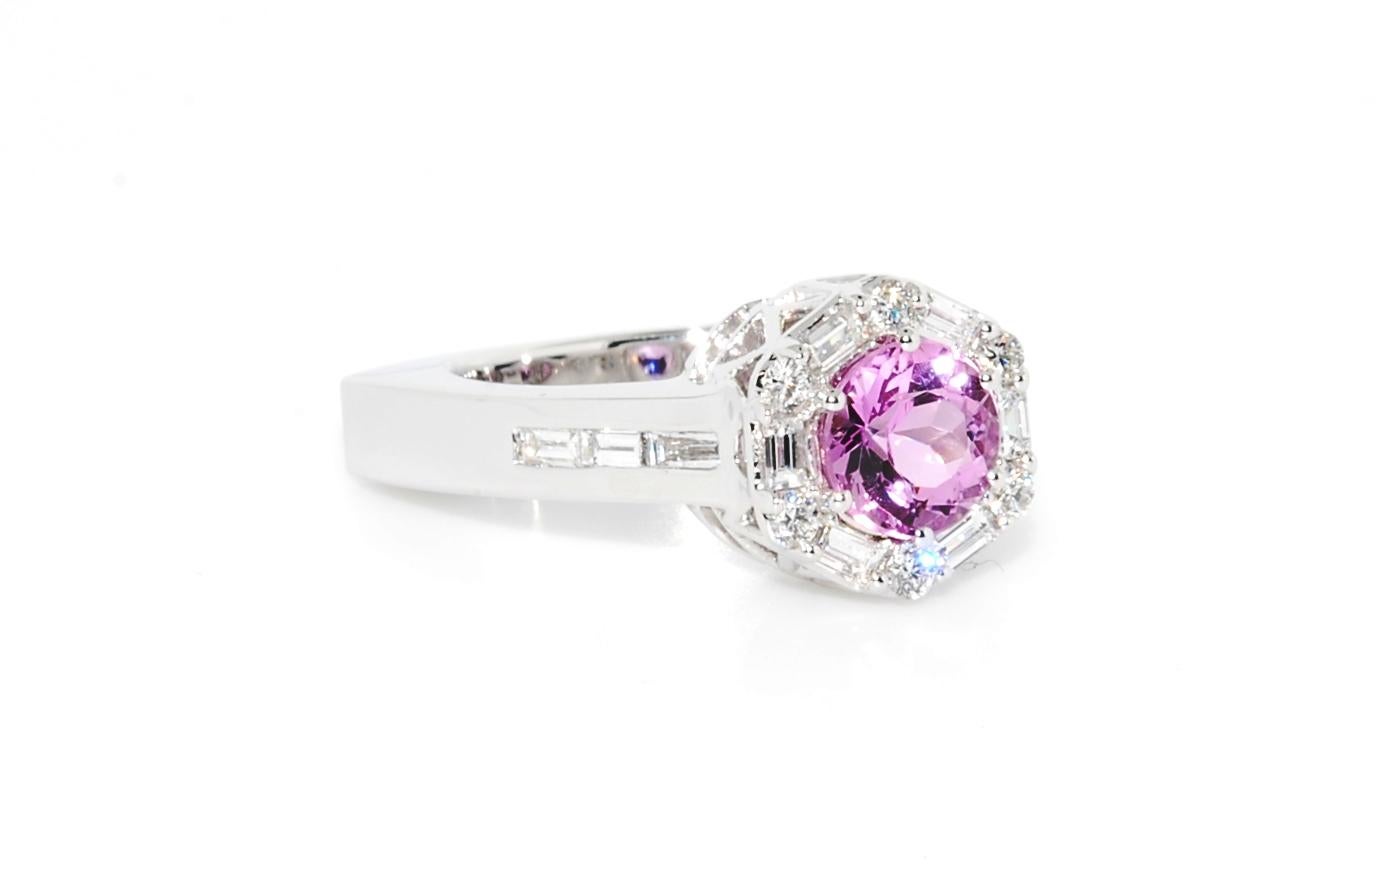 One of one by Erica Sanchez-Hawkins. Fantastic Natural pink Topaz - this can be a unique engagement ring or a beautiful fashion piece. The Topaz weighs 1.41 carats and it is surrounded in a diamond halo that features both baguettes and round full